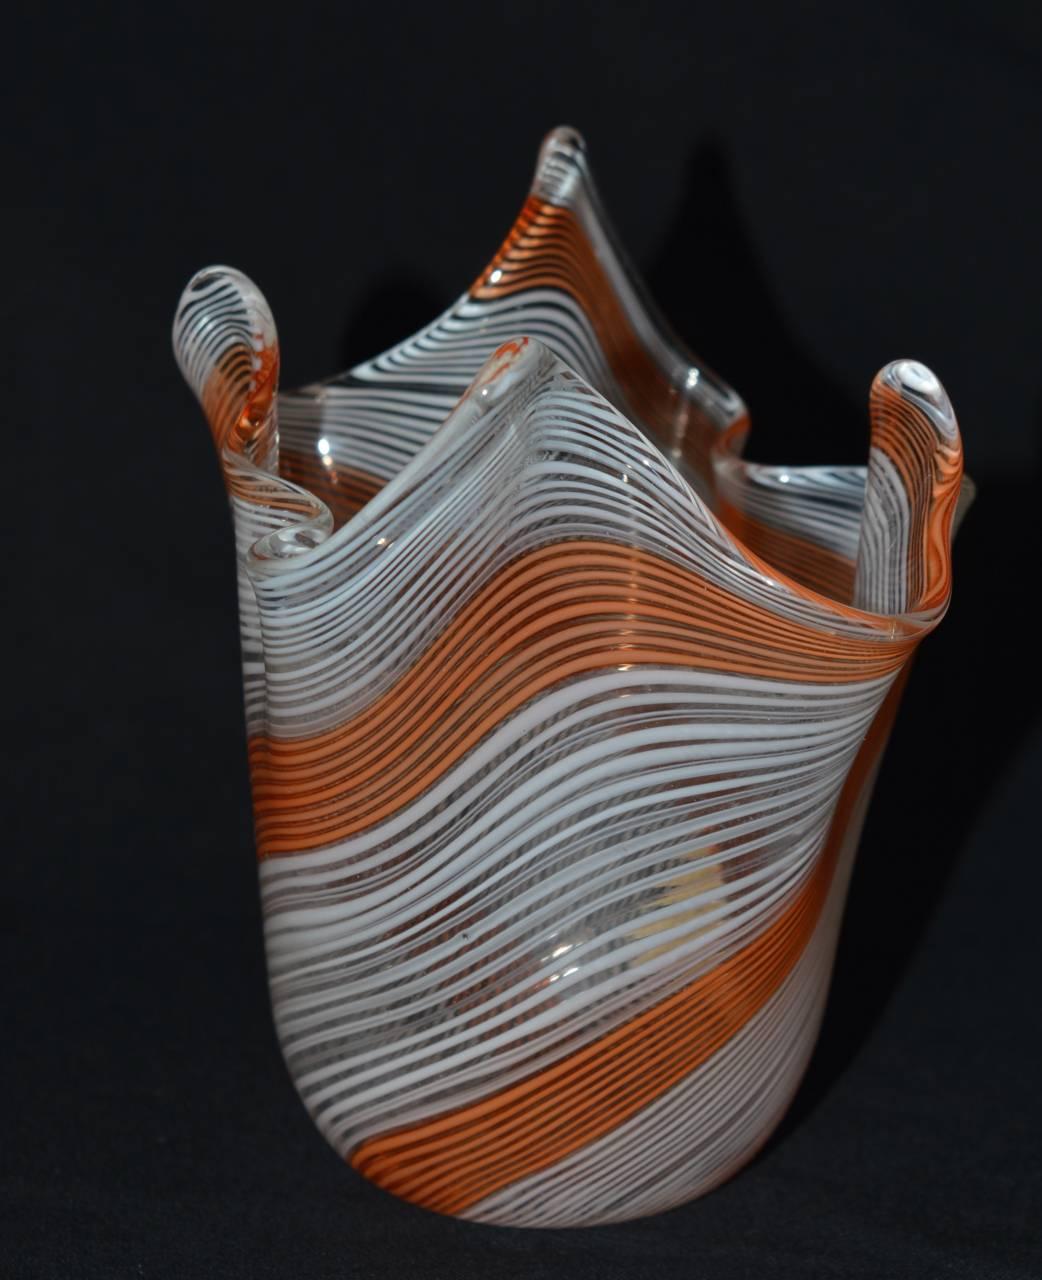 A 1950s handblown Murano glass "handkerchief" form vase attributed to Venini. In excellent condition with the original label. Distinctive orange and white striped pattern are artfully swirled in the twisting of the molten glass.